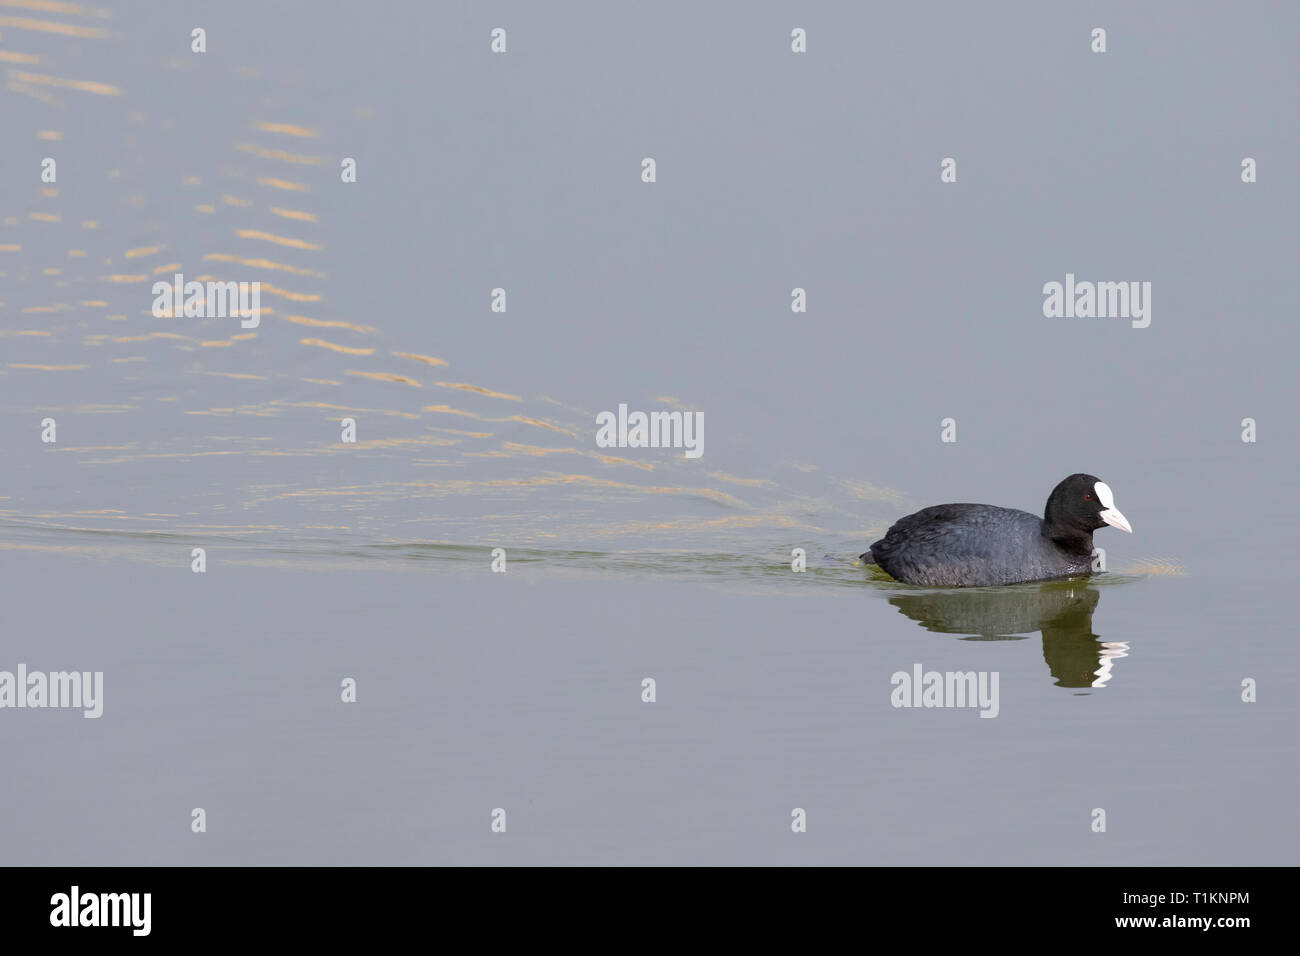 Common Coot (Fulica atra) on water. Natural Areas of the Llobregat Delta. Barcelona province. Catalonia. Spain. Stock Photo